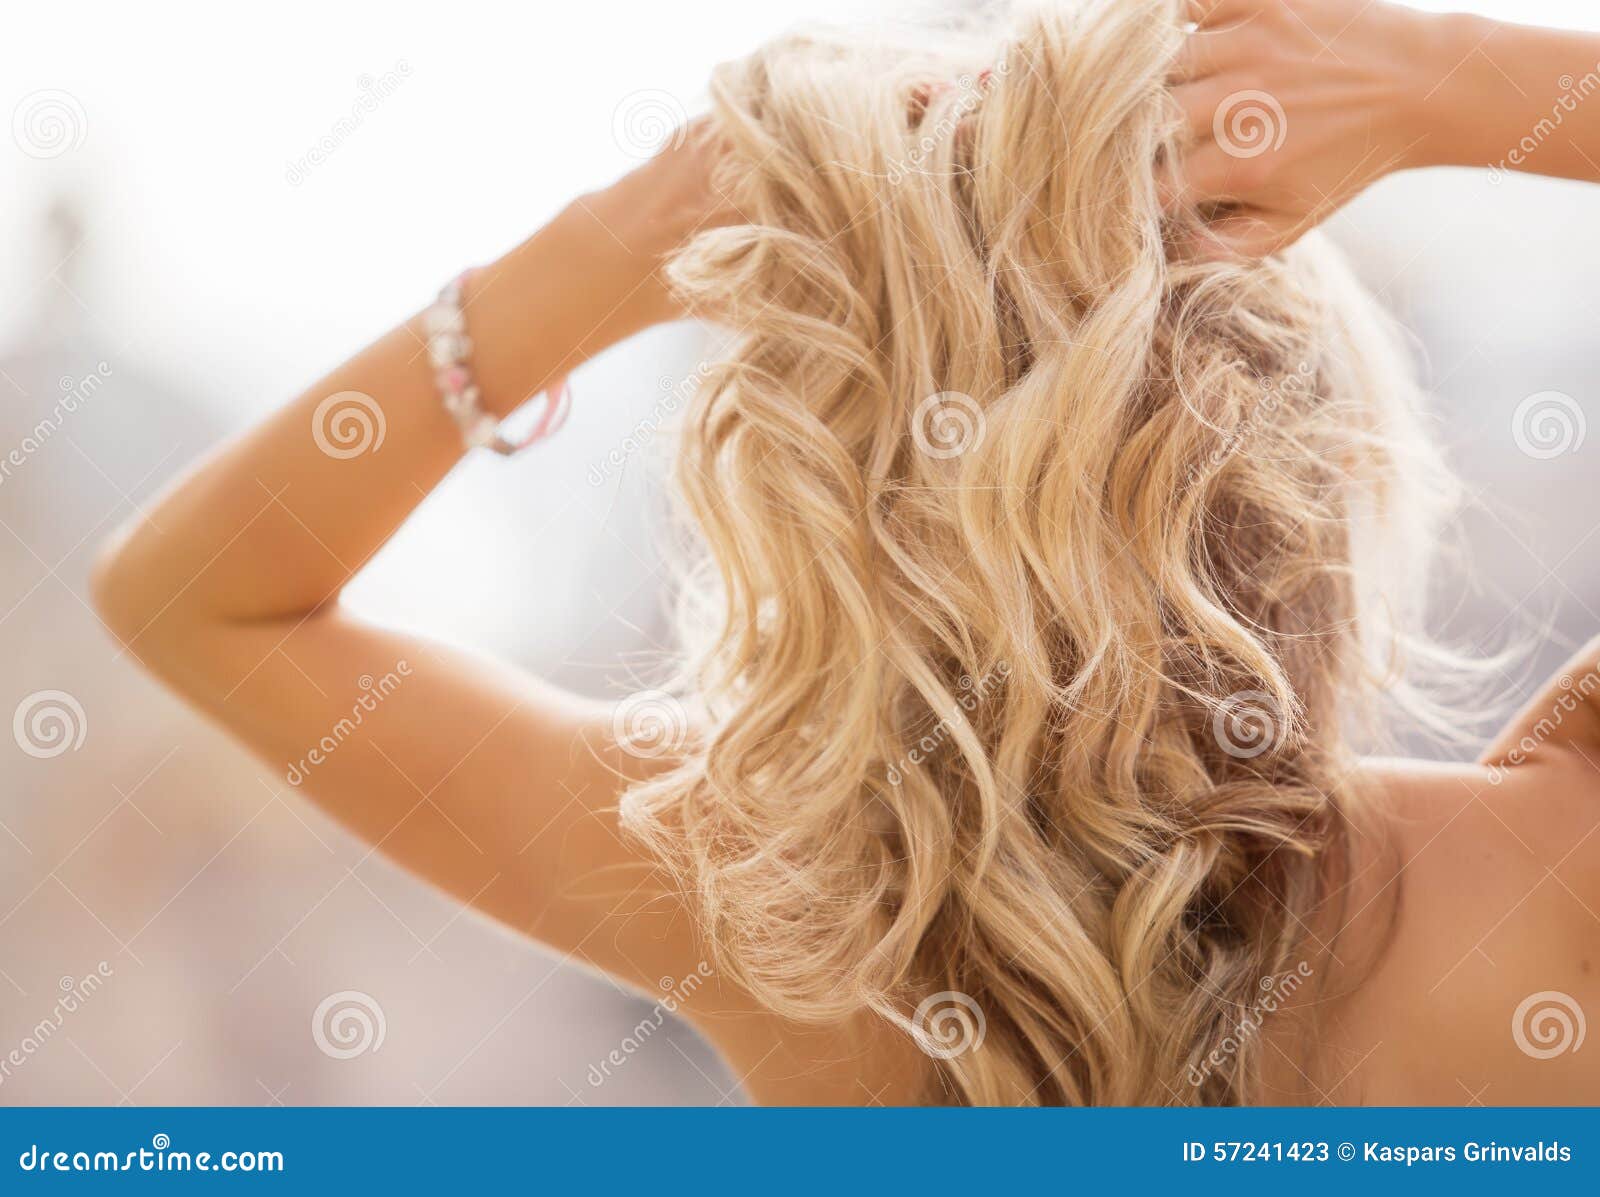 blonde woman holding her hands in hair